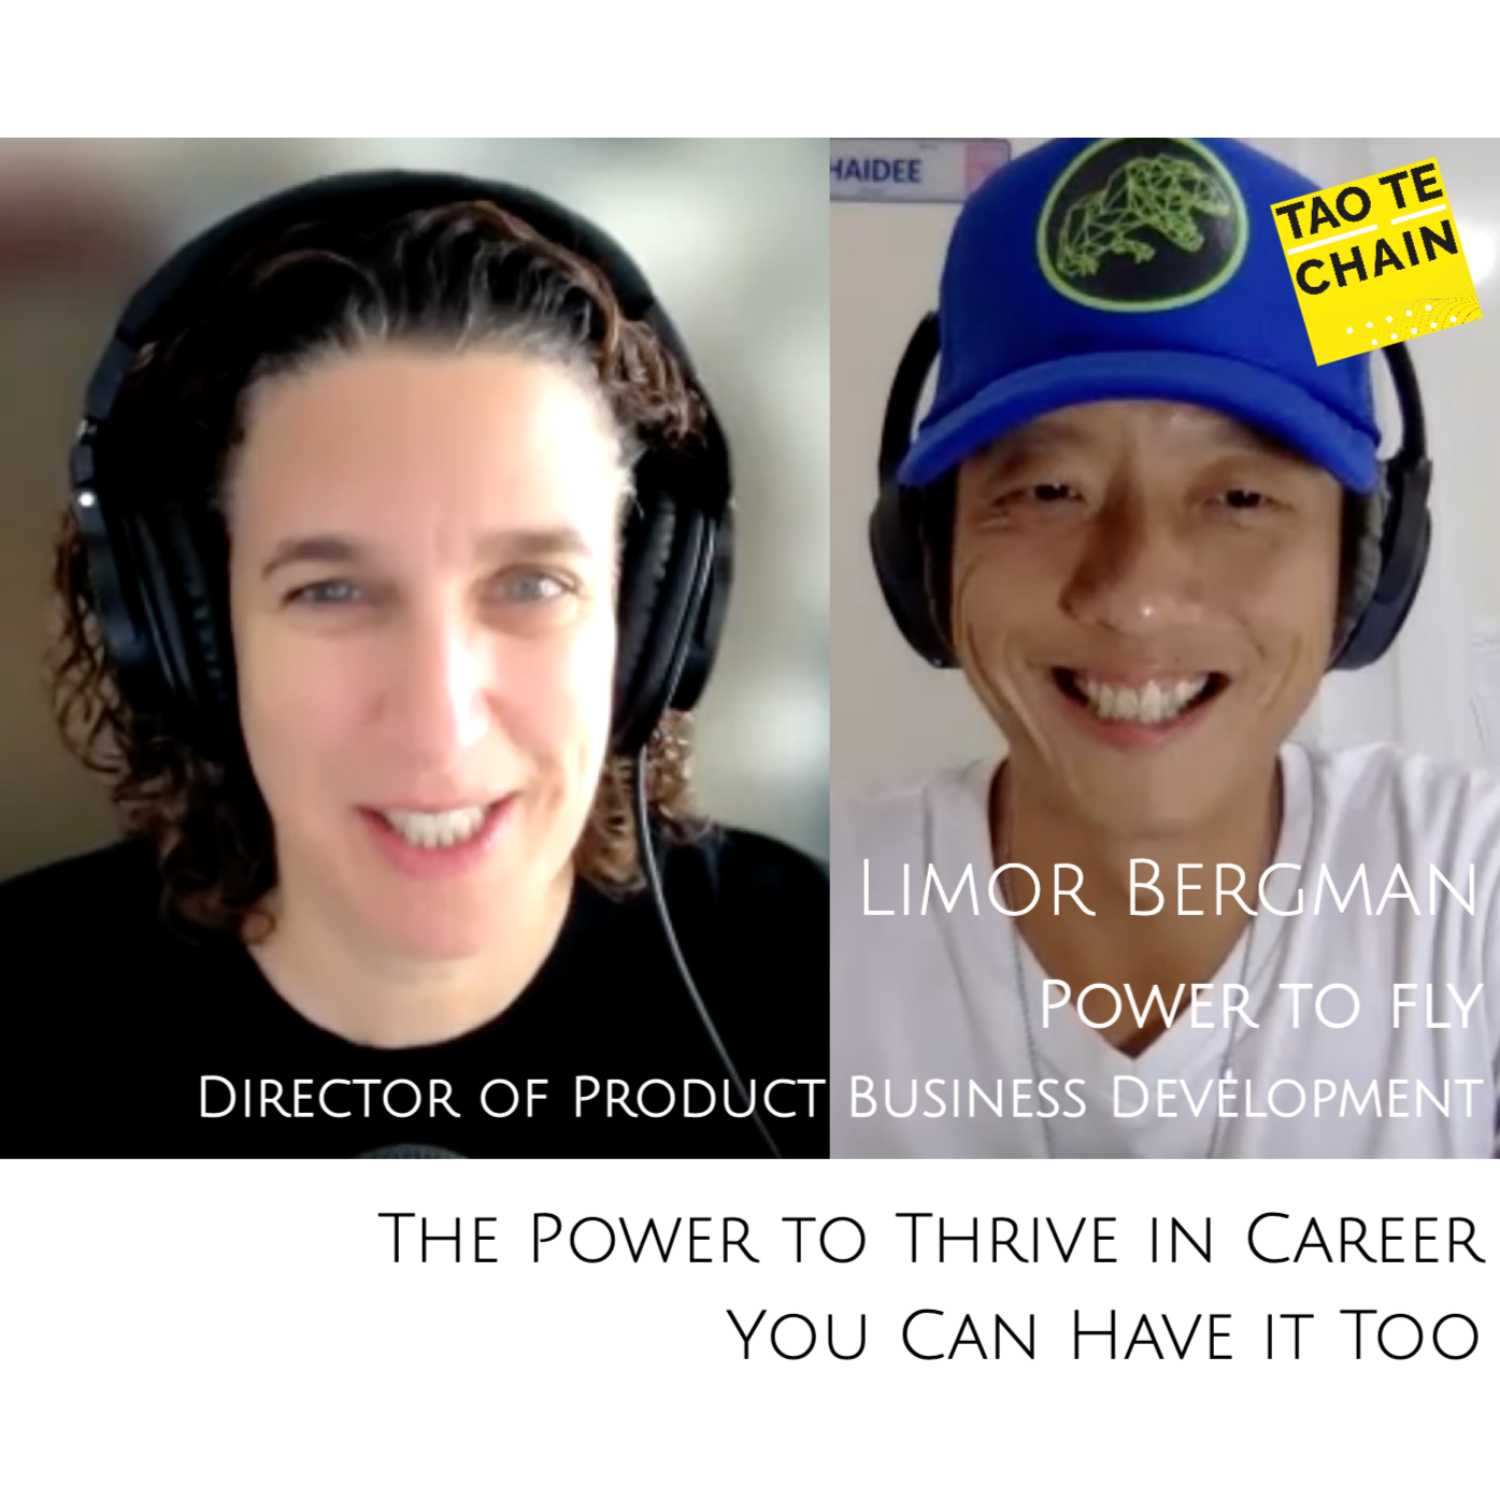 Limor Bergman - The Power to Thrive in Career, You Can Have it Too